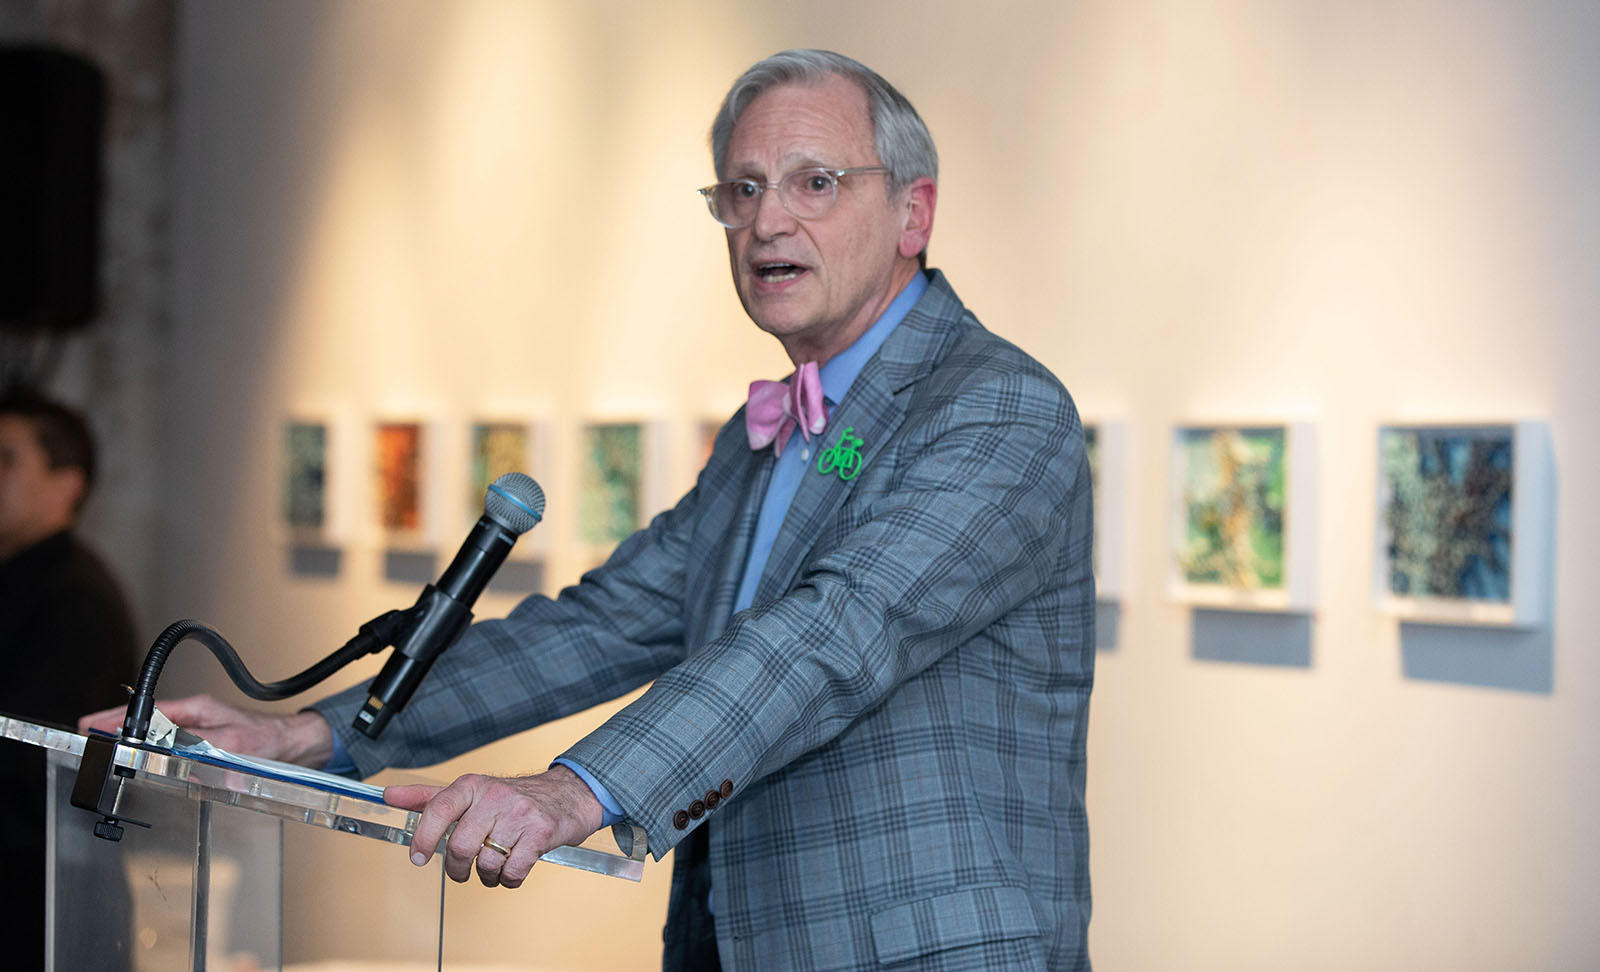 Oregon Congressman Earl Blumenauer speaks about the opportunity to build sustainable, livable cities at the NUMO 2020 reception